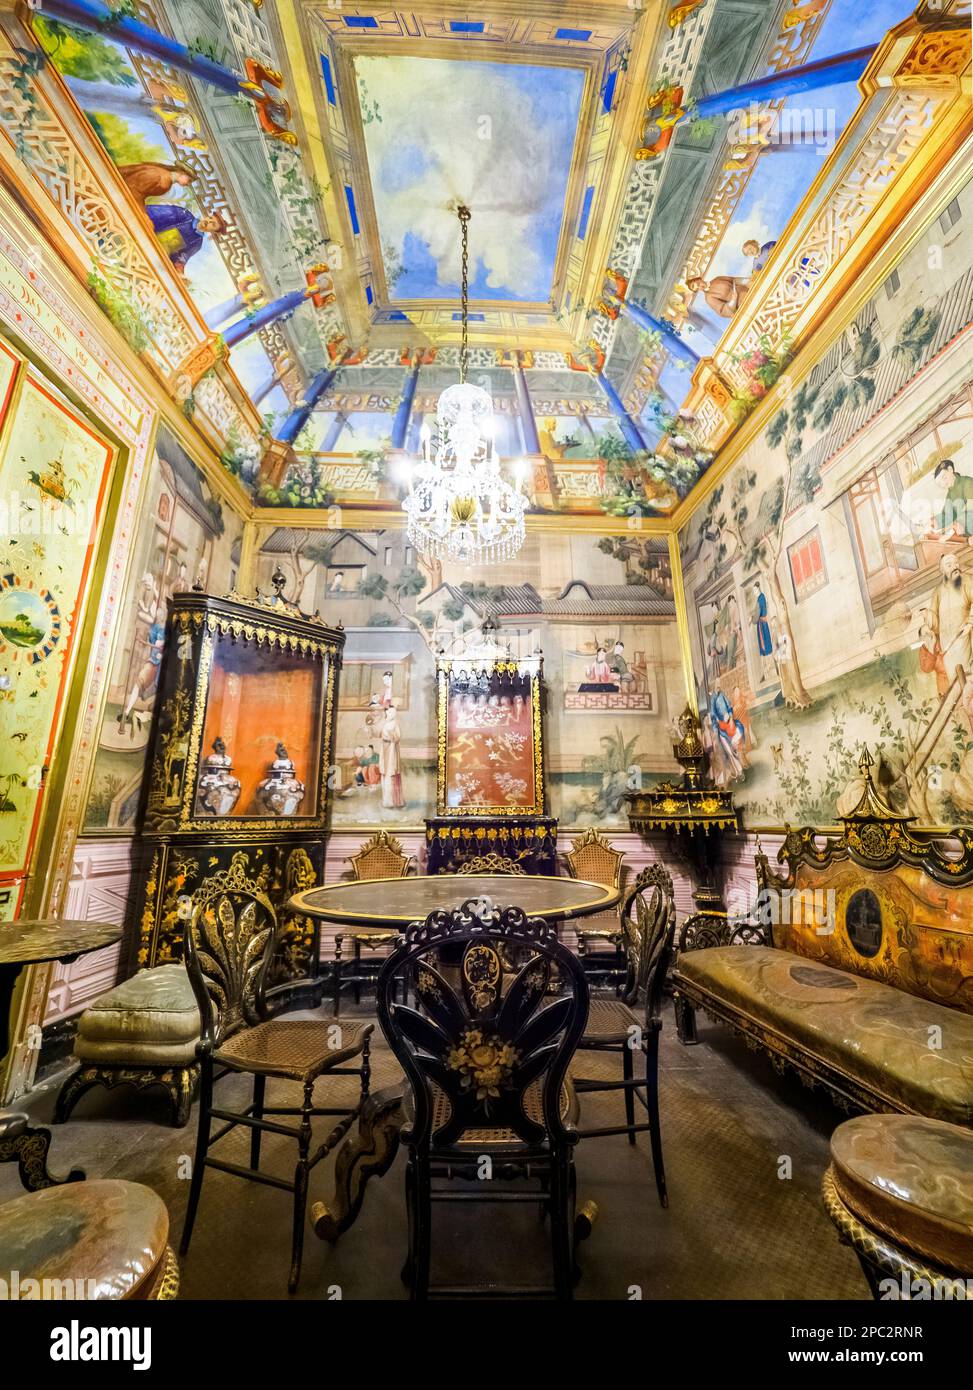 Salottino cinese (Chinese parlor) in the Filangeri-Cutò aristocratic baroque style palace also known as Palazzo Mirto - Palermo, Sicily, Italy Stock Photo